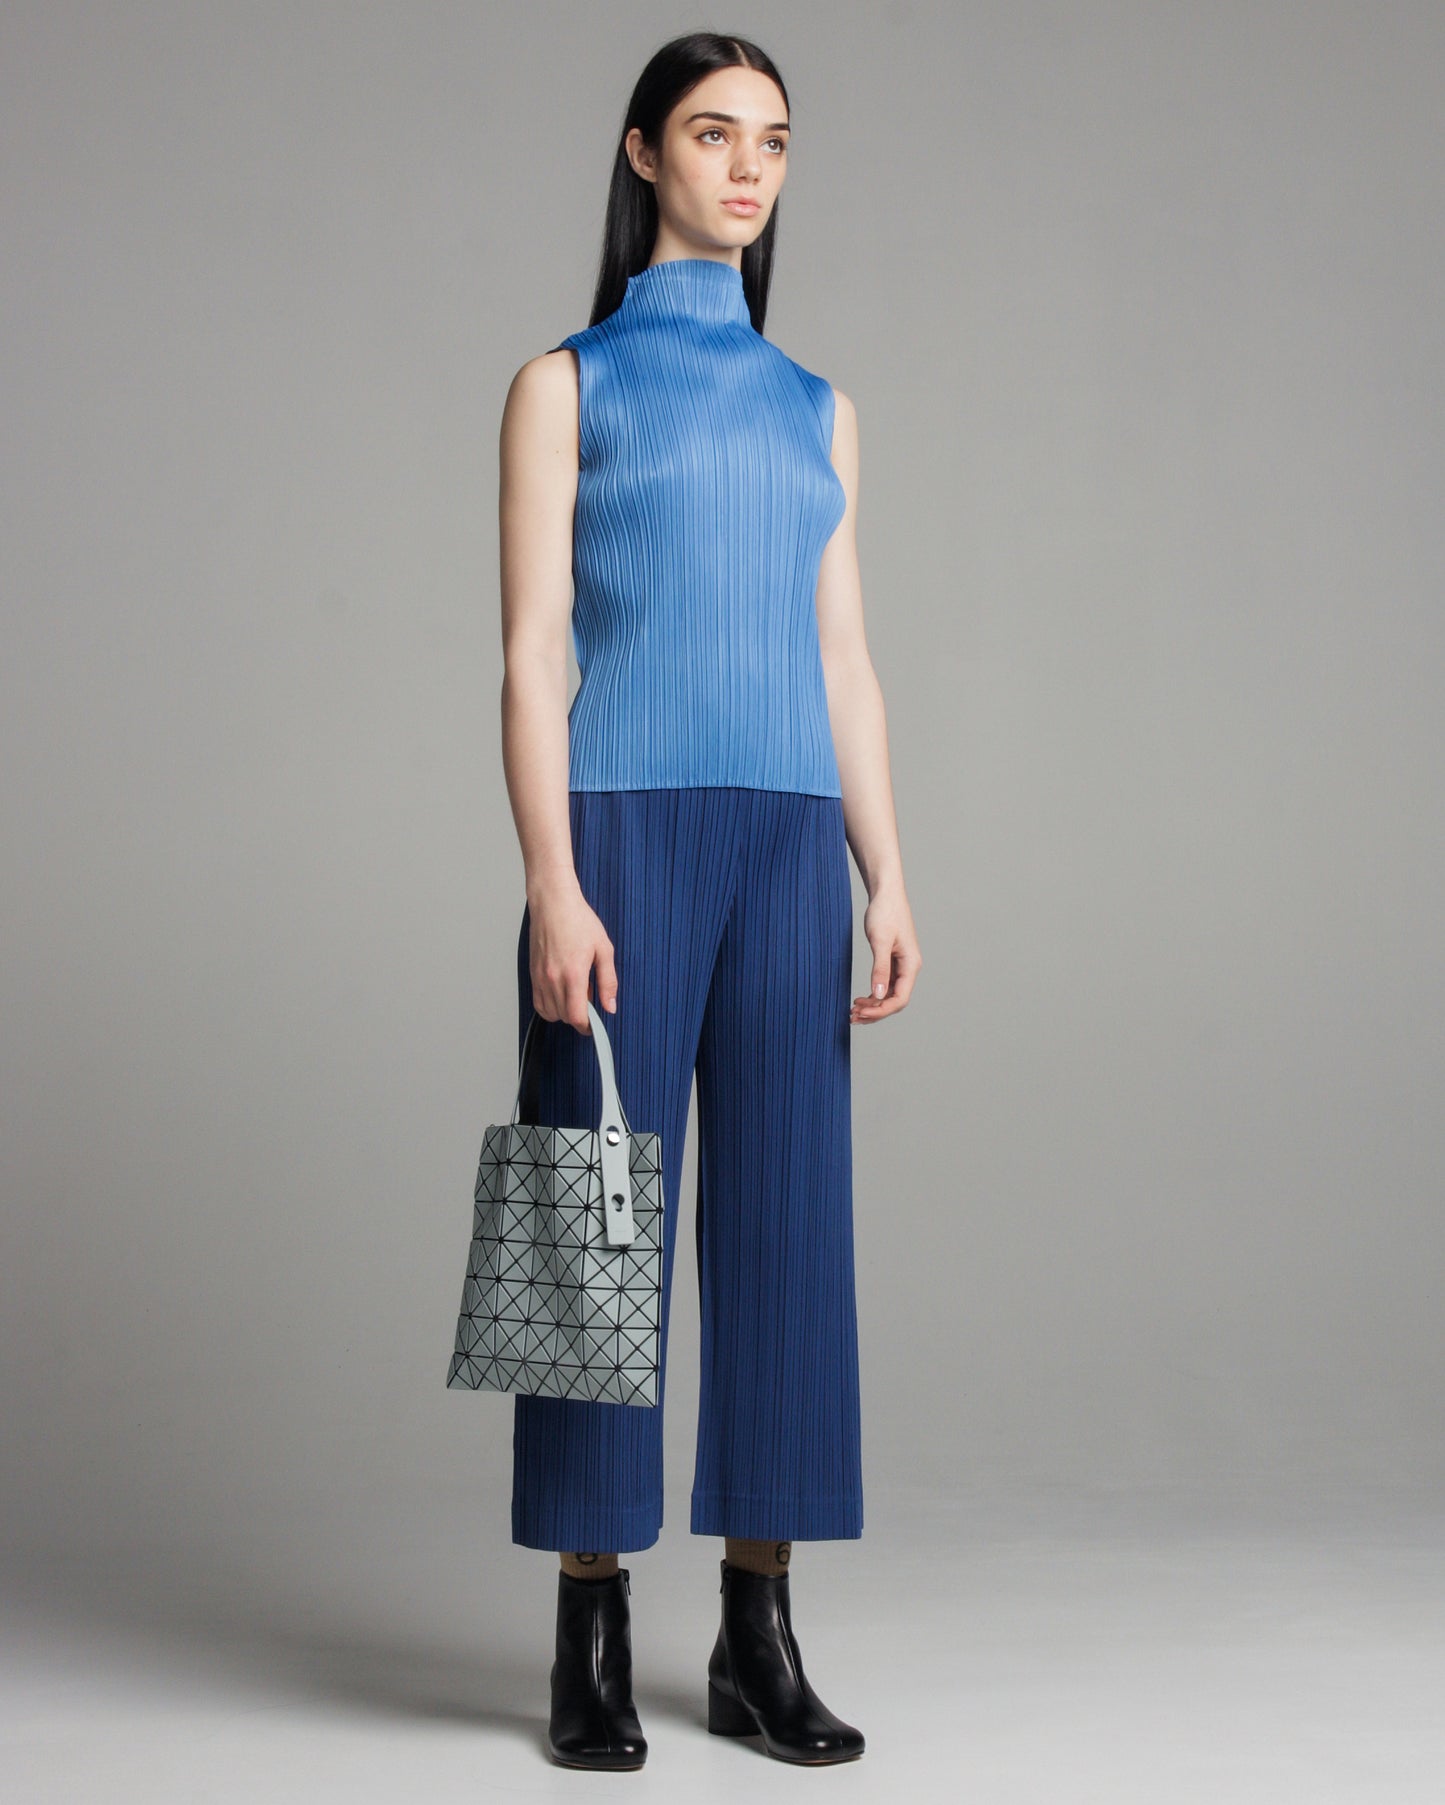 Blue Opaque Pleated Pants